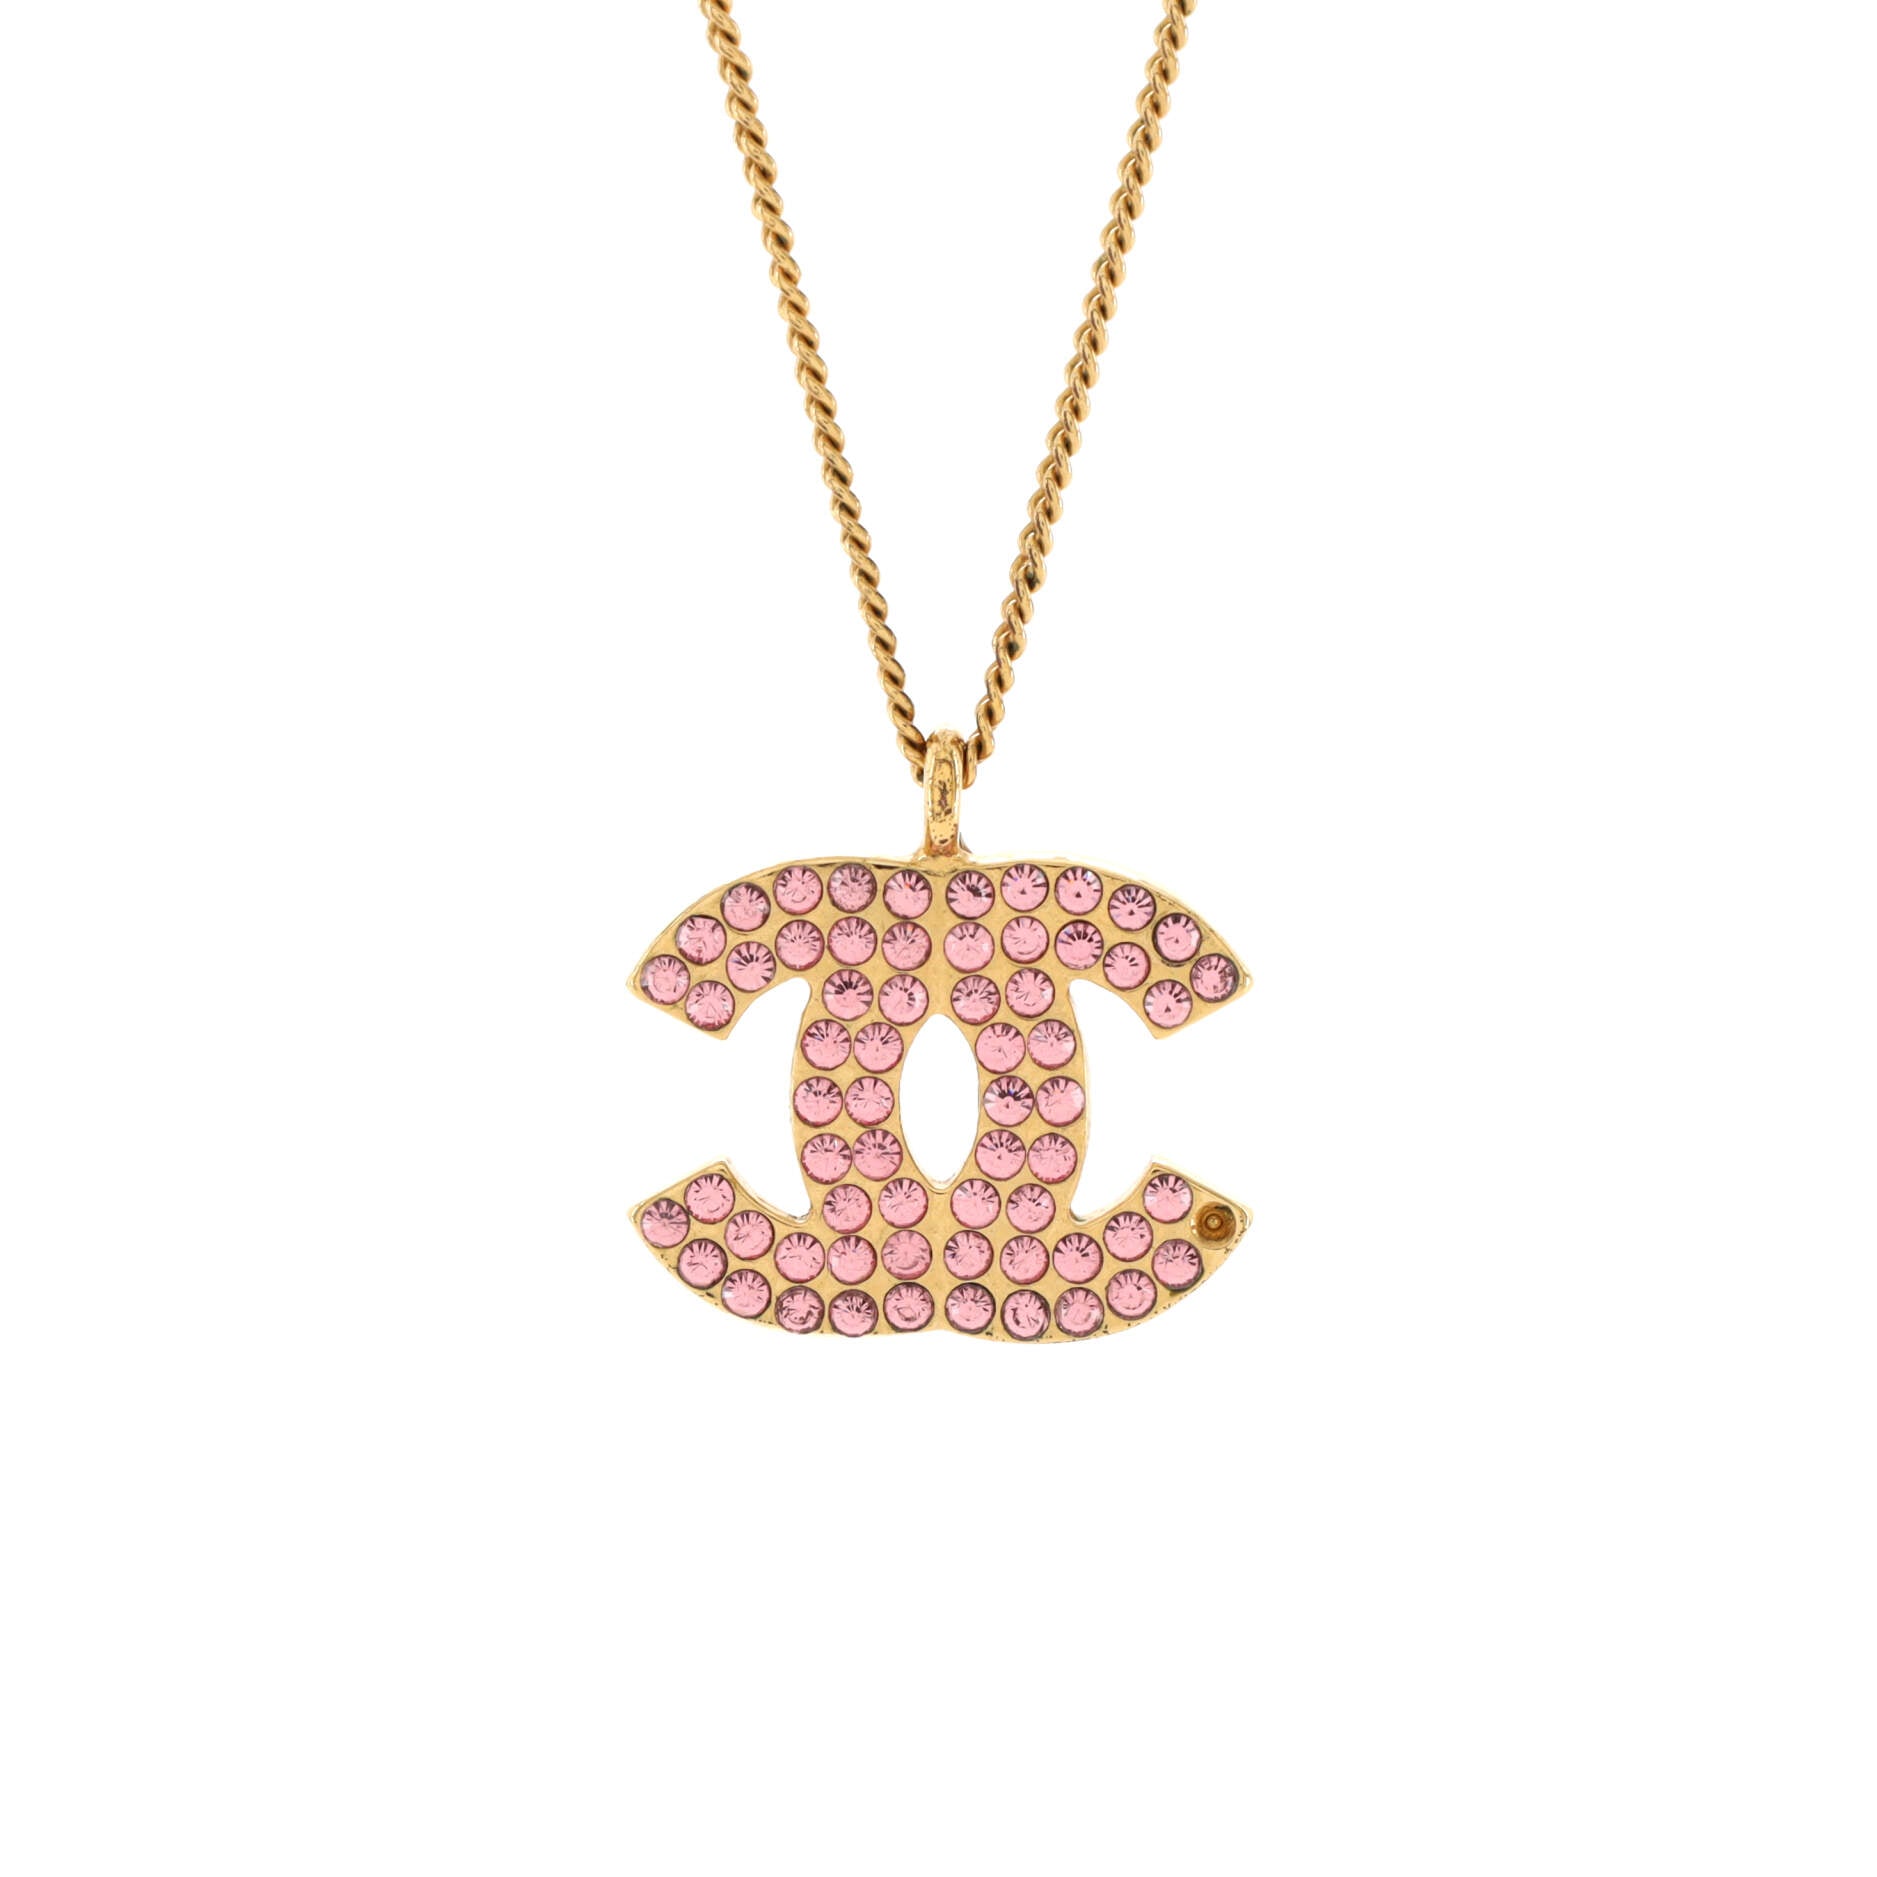 Chanel Pre-owned 1995 Heart Charm Chain Belt - Gold